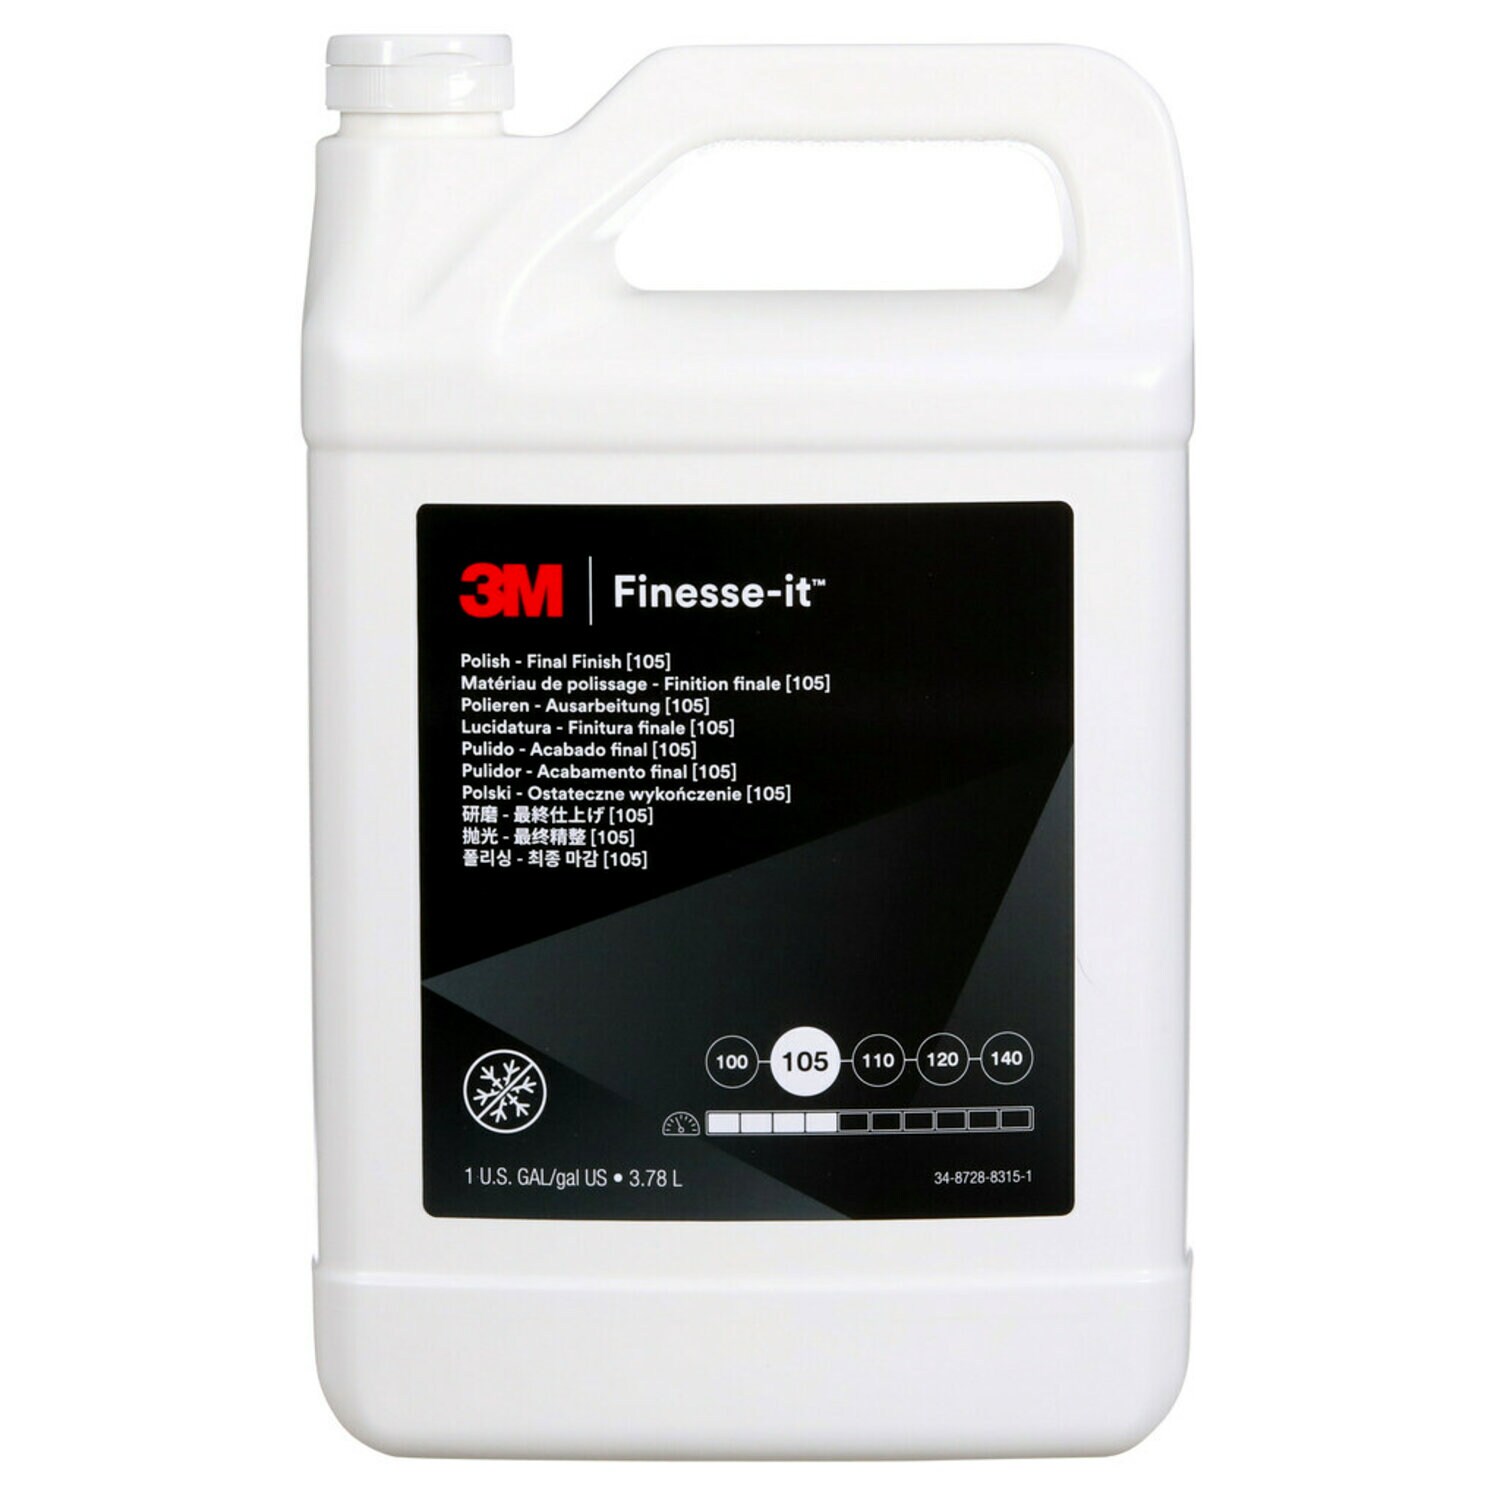 7100075470 - 3M Finesse-it Polish Standard Series, 82878, Final Finish (105), Gray,
Easy Clean Up, 3.785 Liter (1 US Gallon), 4 ea/Case